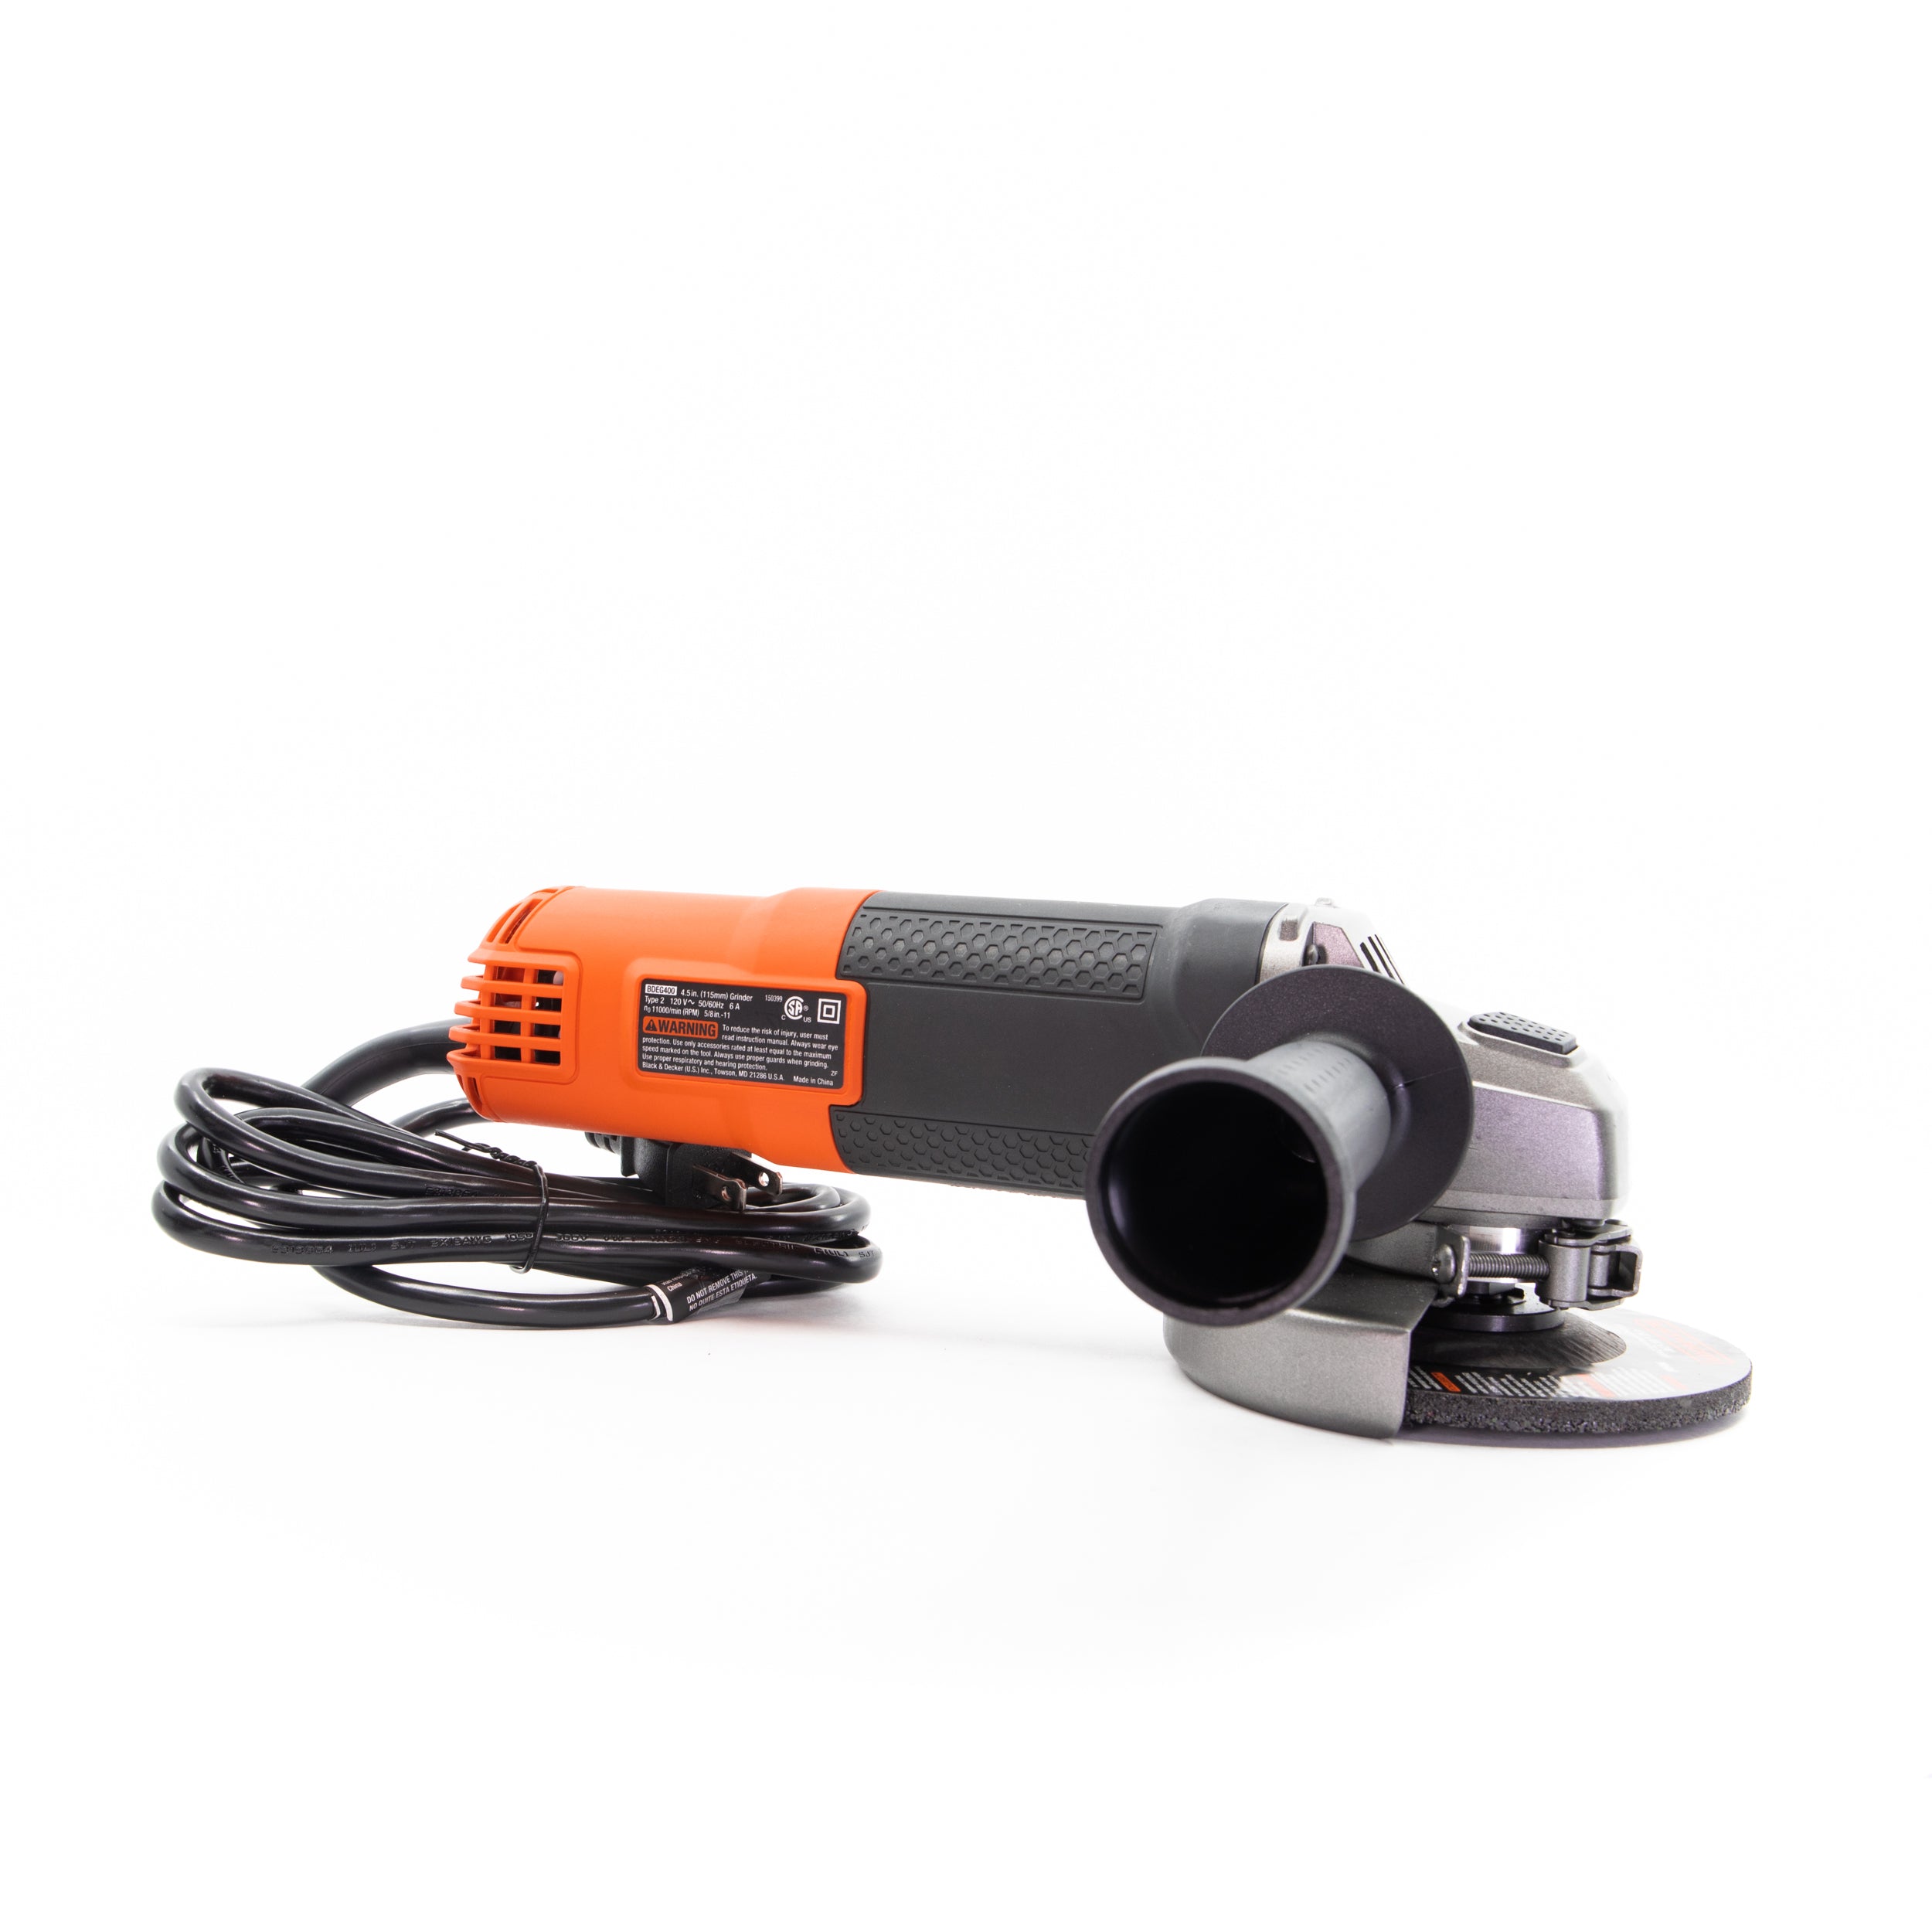 Black & Decker 7750 4-1/2-Inch Small Angle Grinder